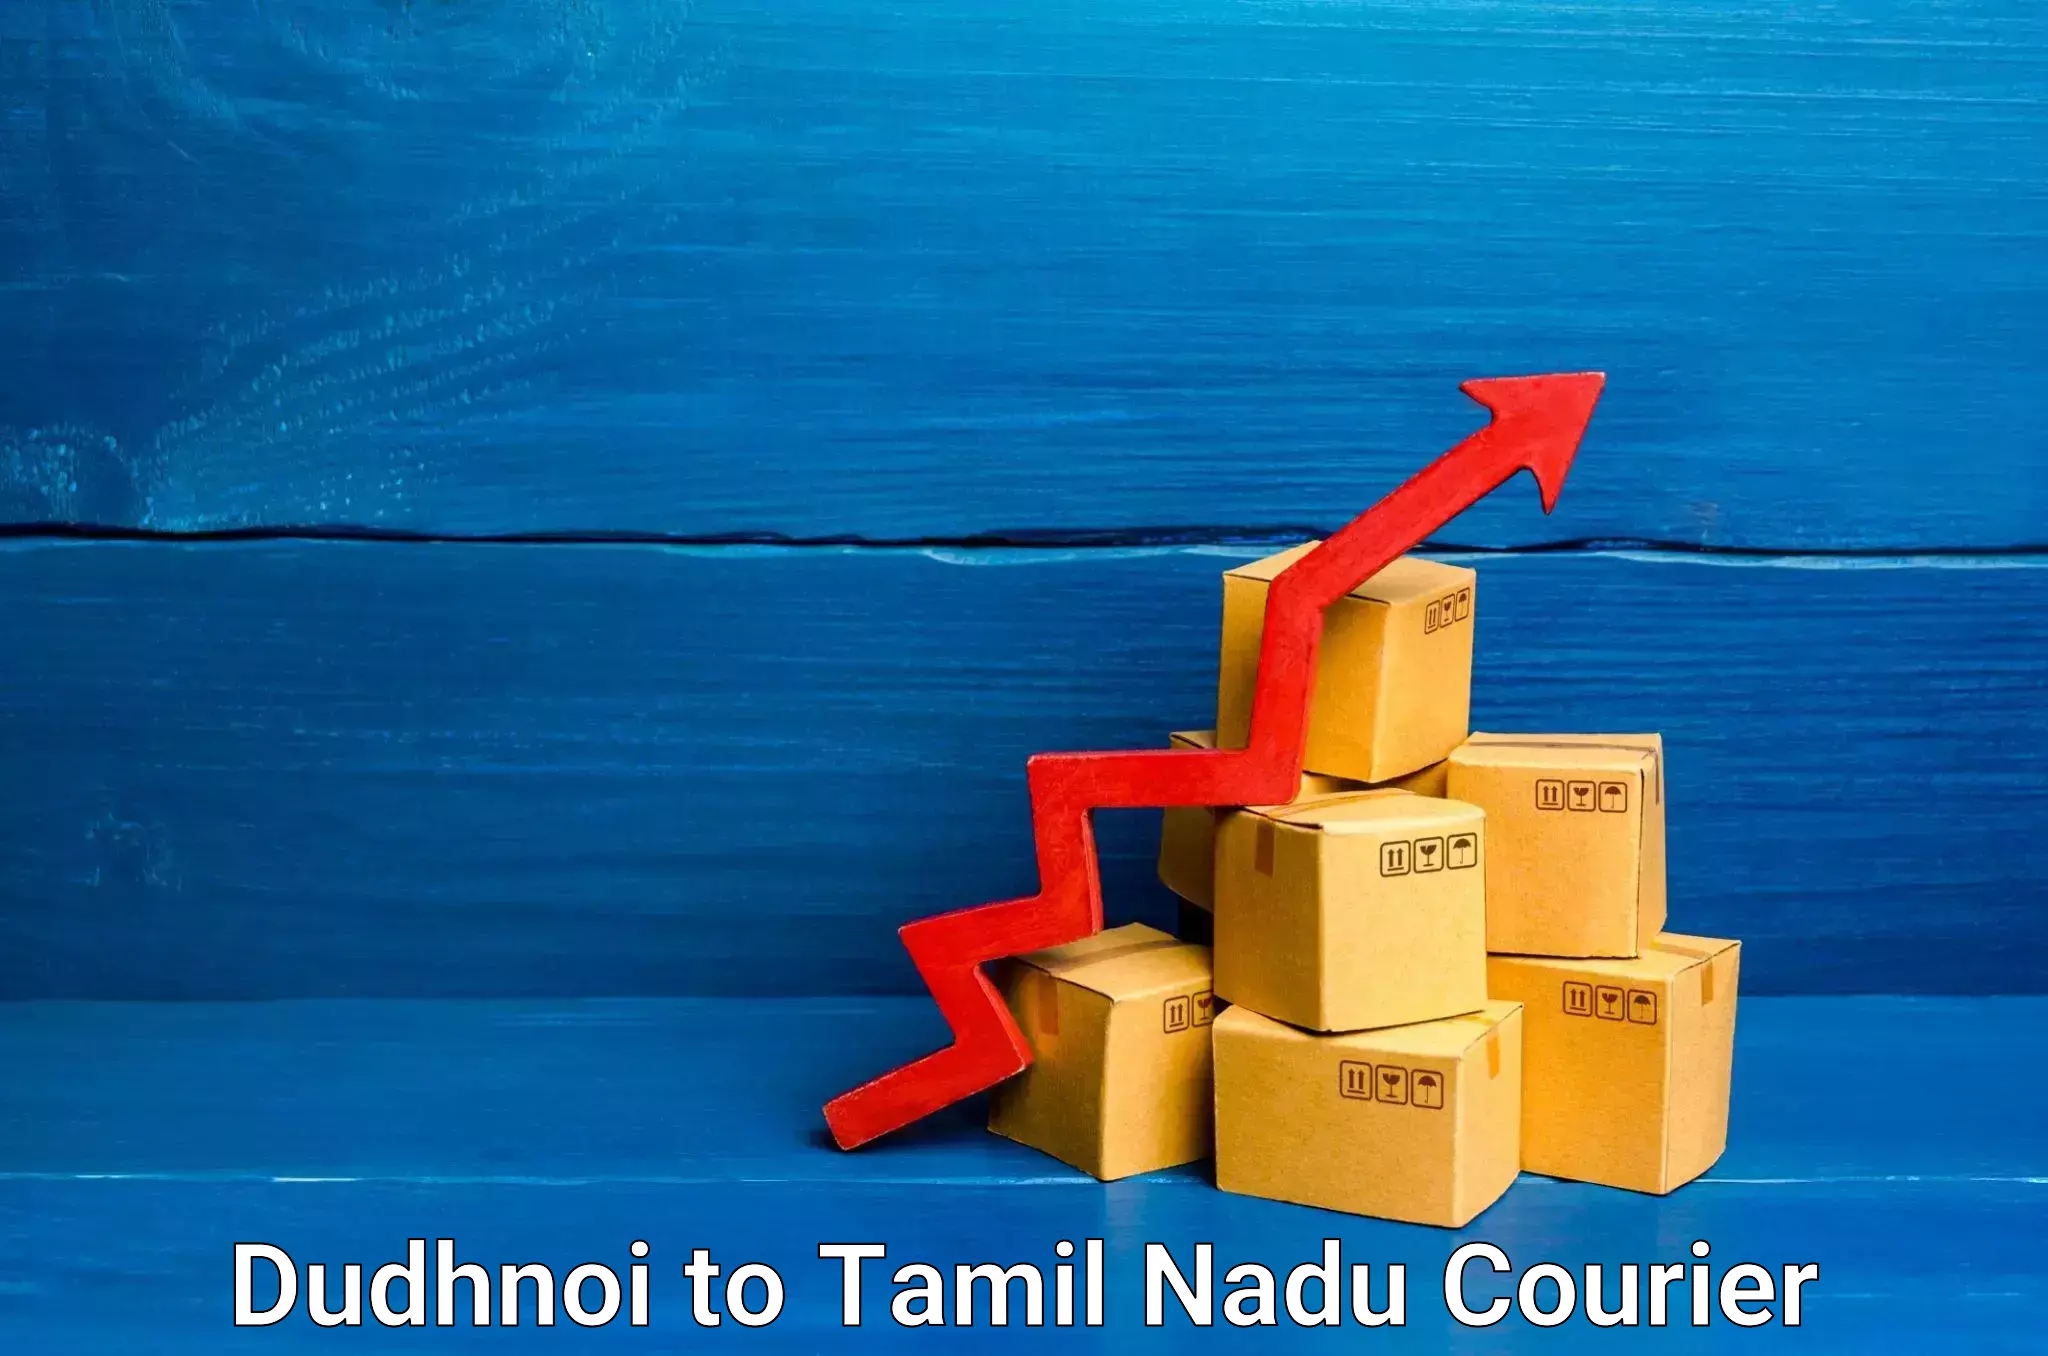 Seamless shipping experience in Dudhnoi to Melmaruvathur